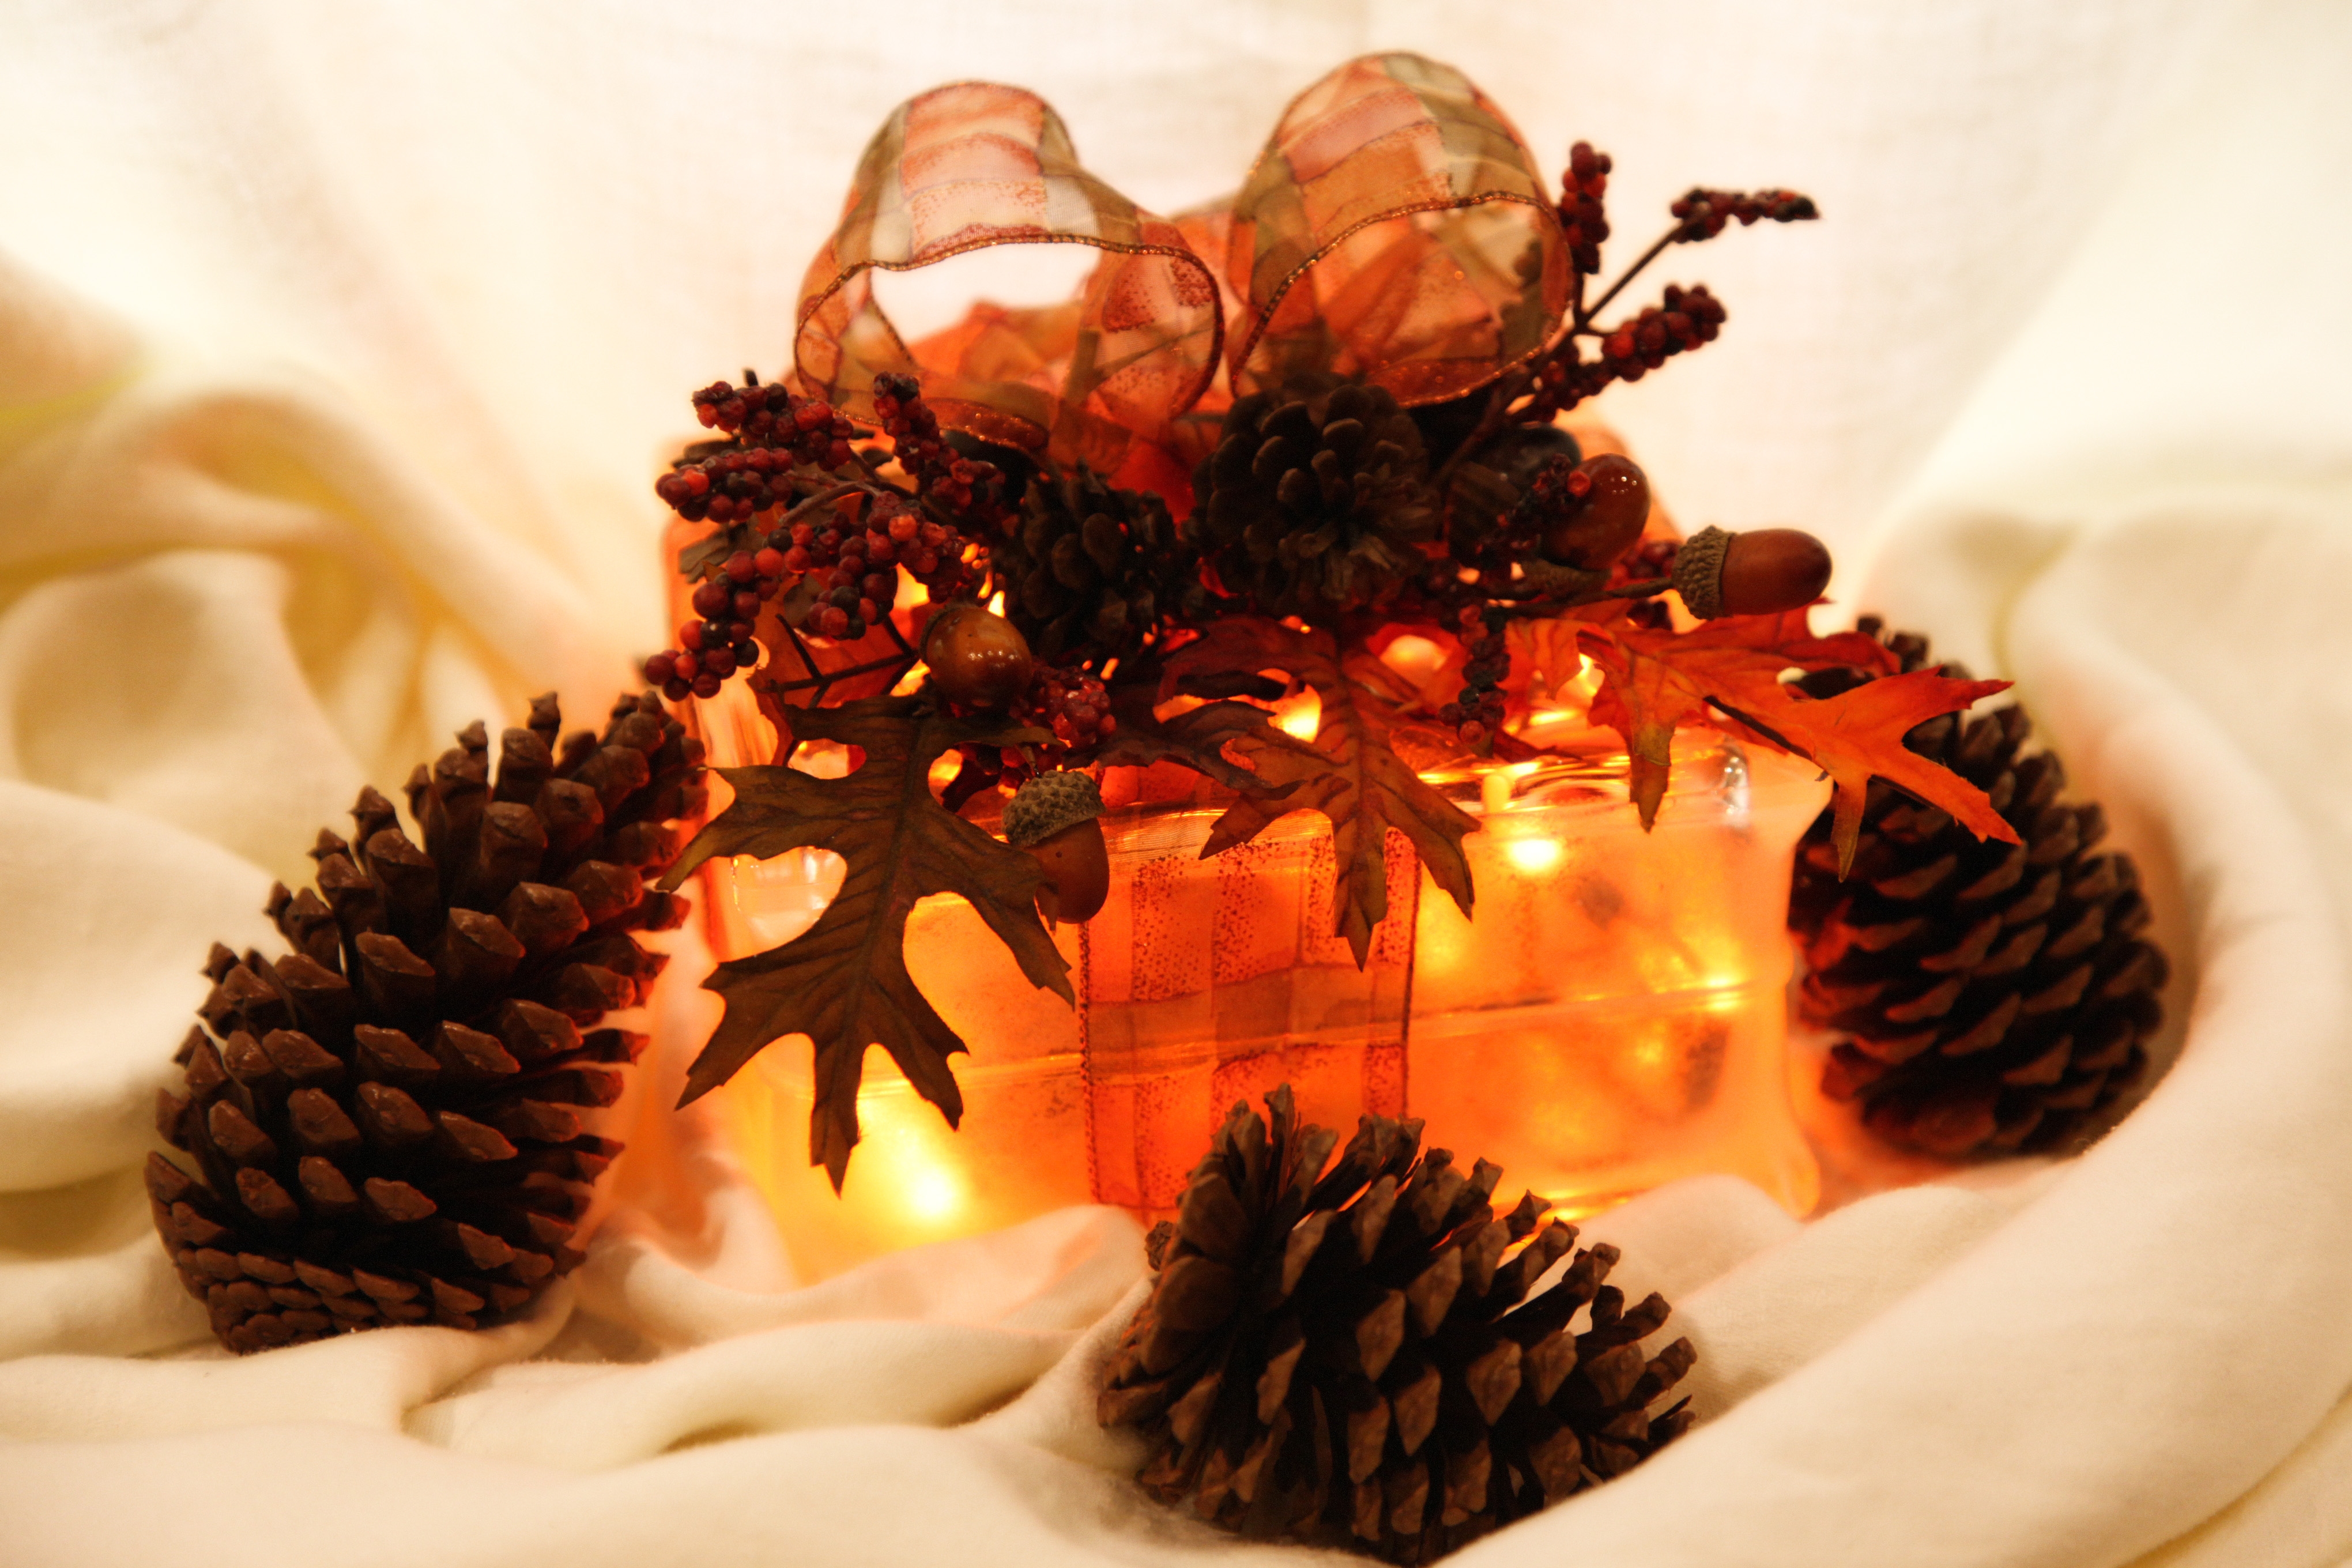 Free photo A glowing gift for the new year with pinecones